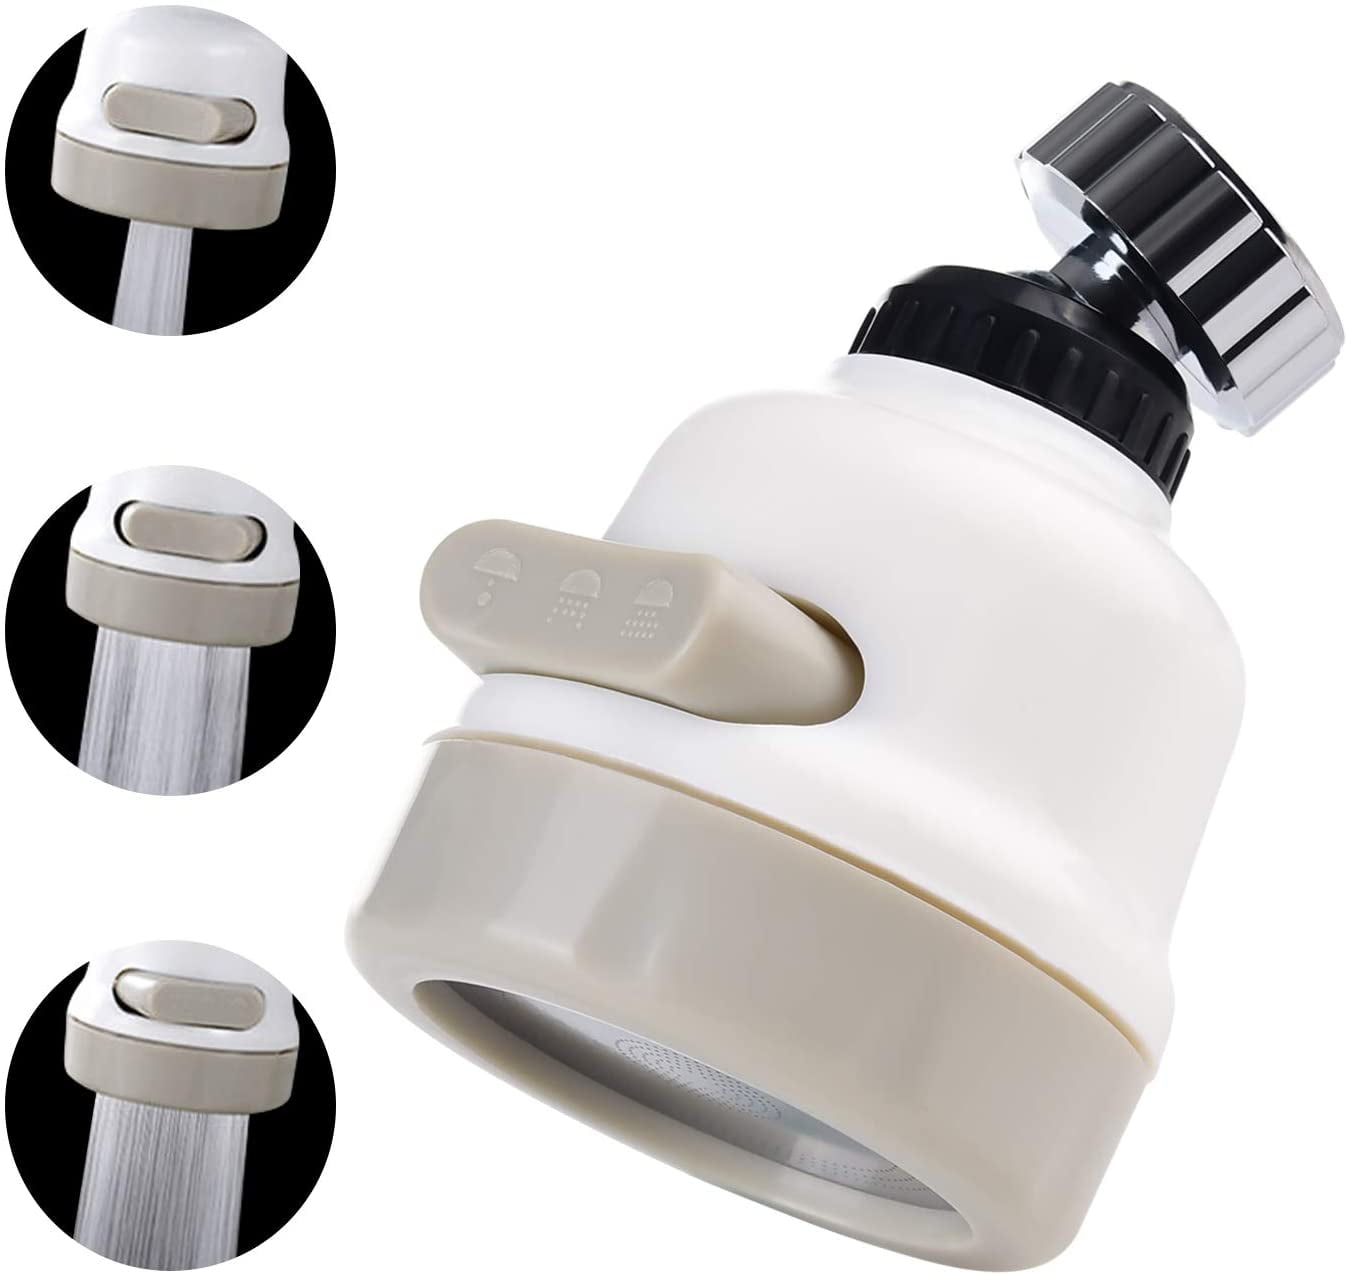 2 Pieces Kitchen Tap Universal Faucet Extension 360° Rotatable Faucet Sprayer for Bathroom Kitchen Tap Nozzle Filter Adapter